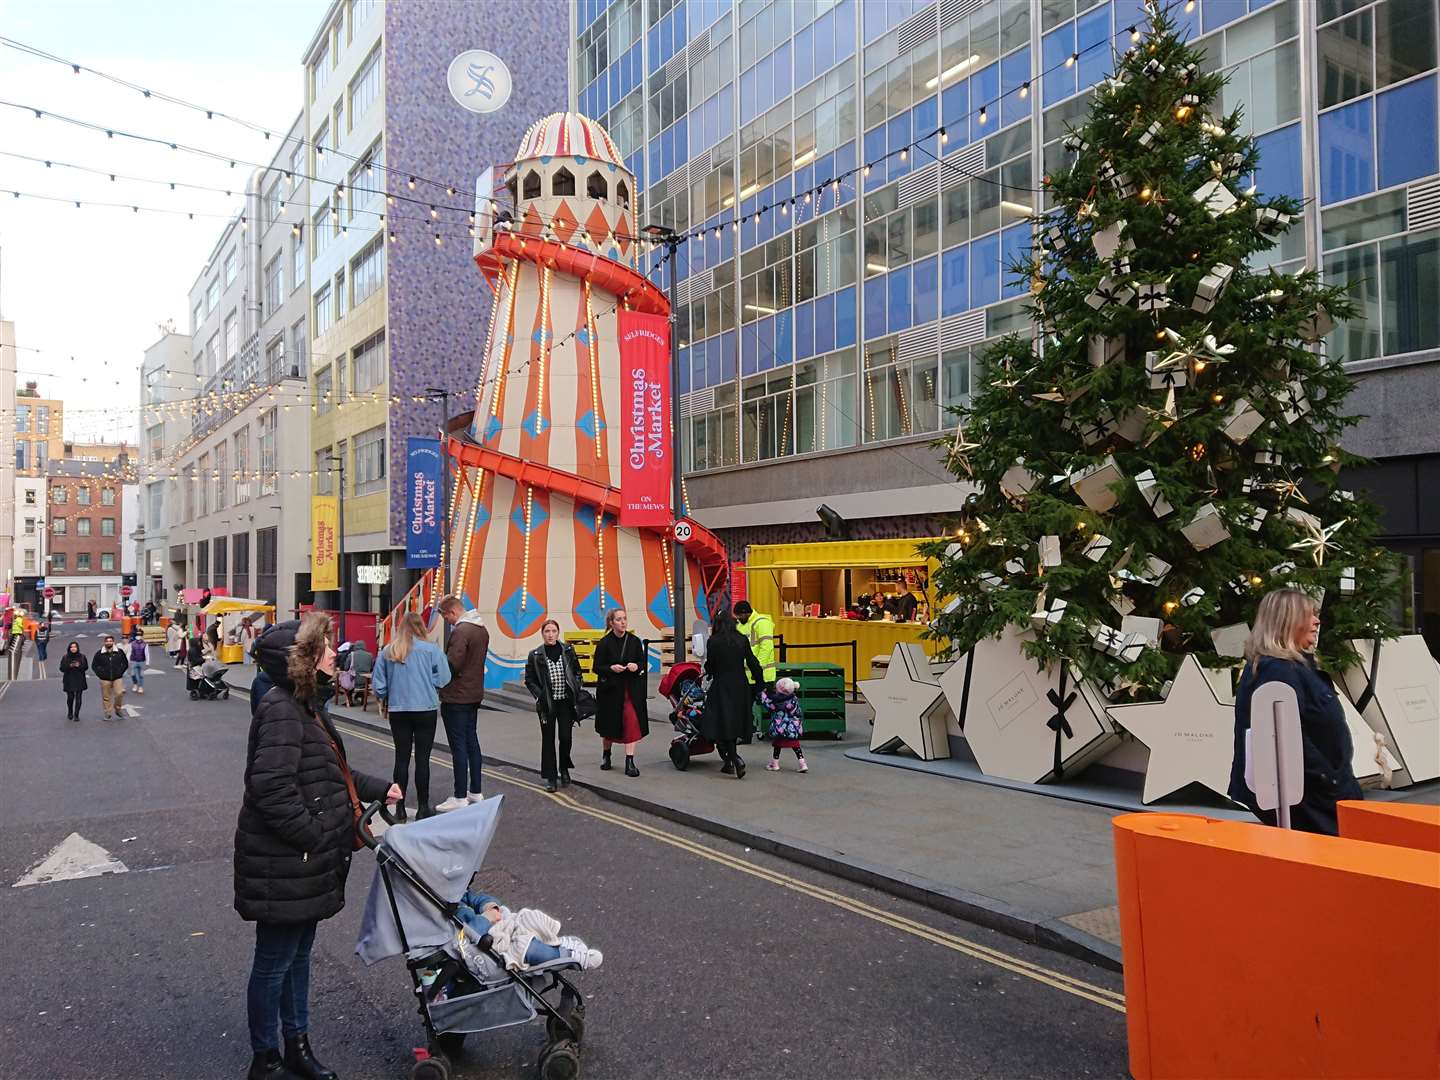 The giant Christmas tree and helter skelter at the Selfridges Christmas Market on the Mews